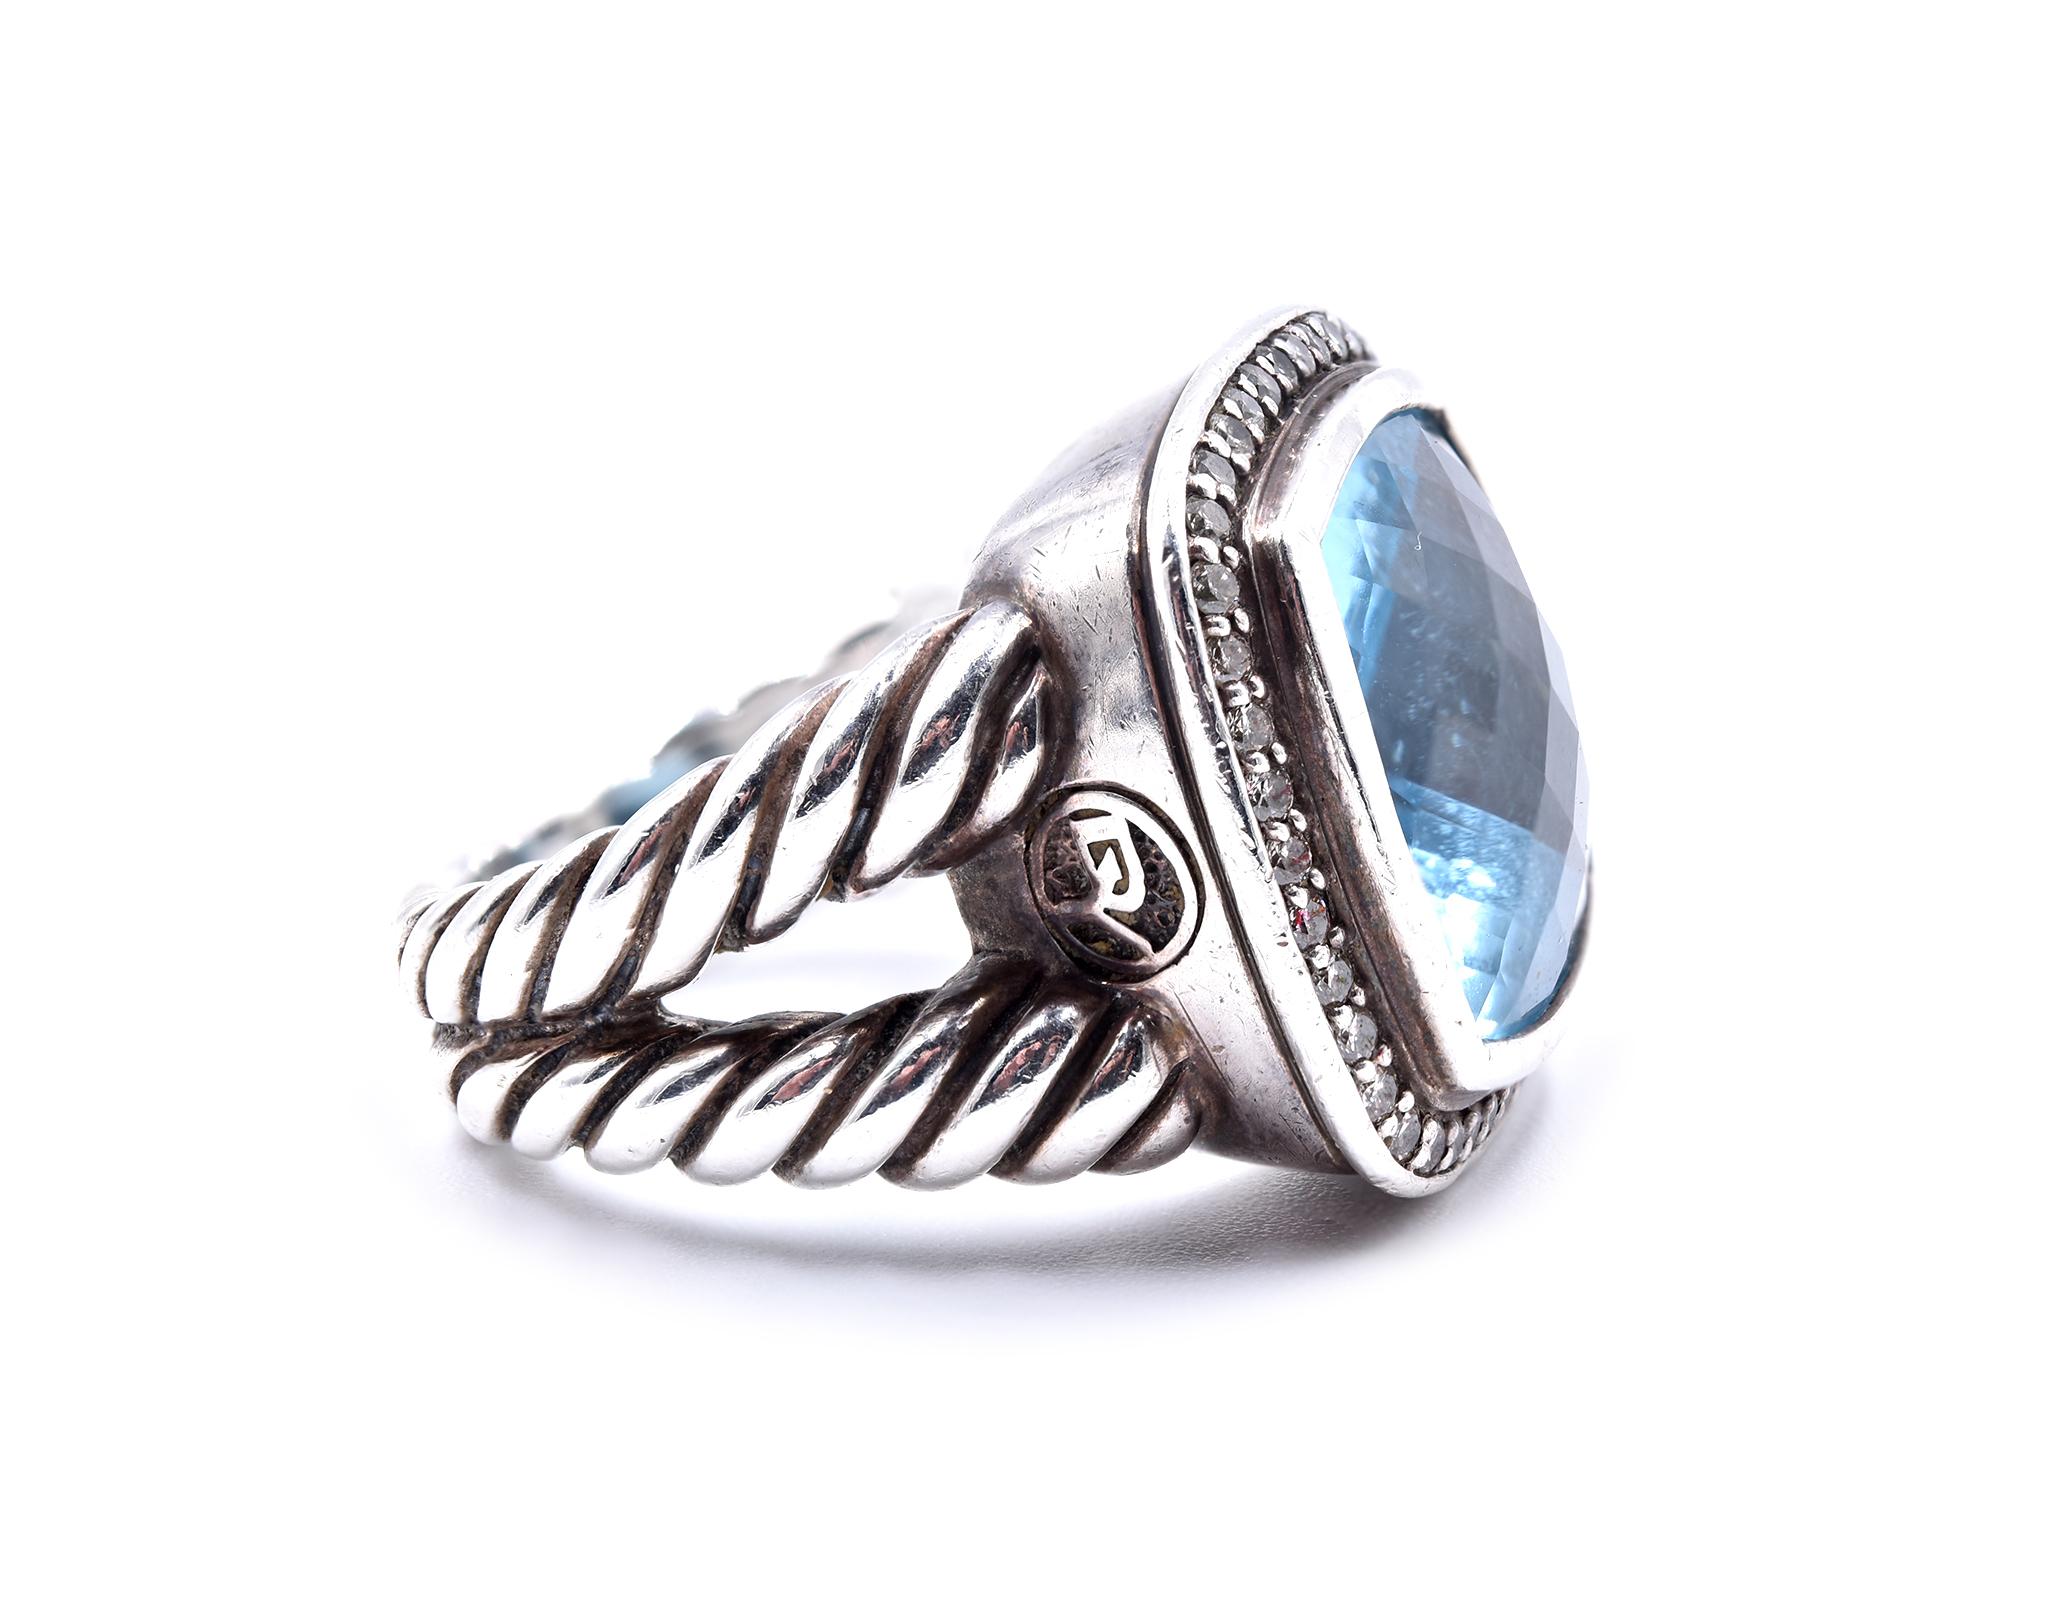 Designer: David Yurman
Material: sterling silver
Diamonds: 42 round brilliant diamonds= .25cttw
Color: G
Clarity: VS
Size: 6 ½ (please allow two additional shipping days for sizing requests)
Dimensions: ring top is approximately 19.61mm by